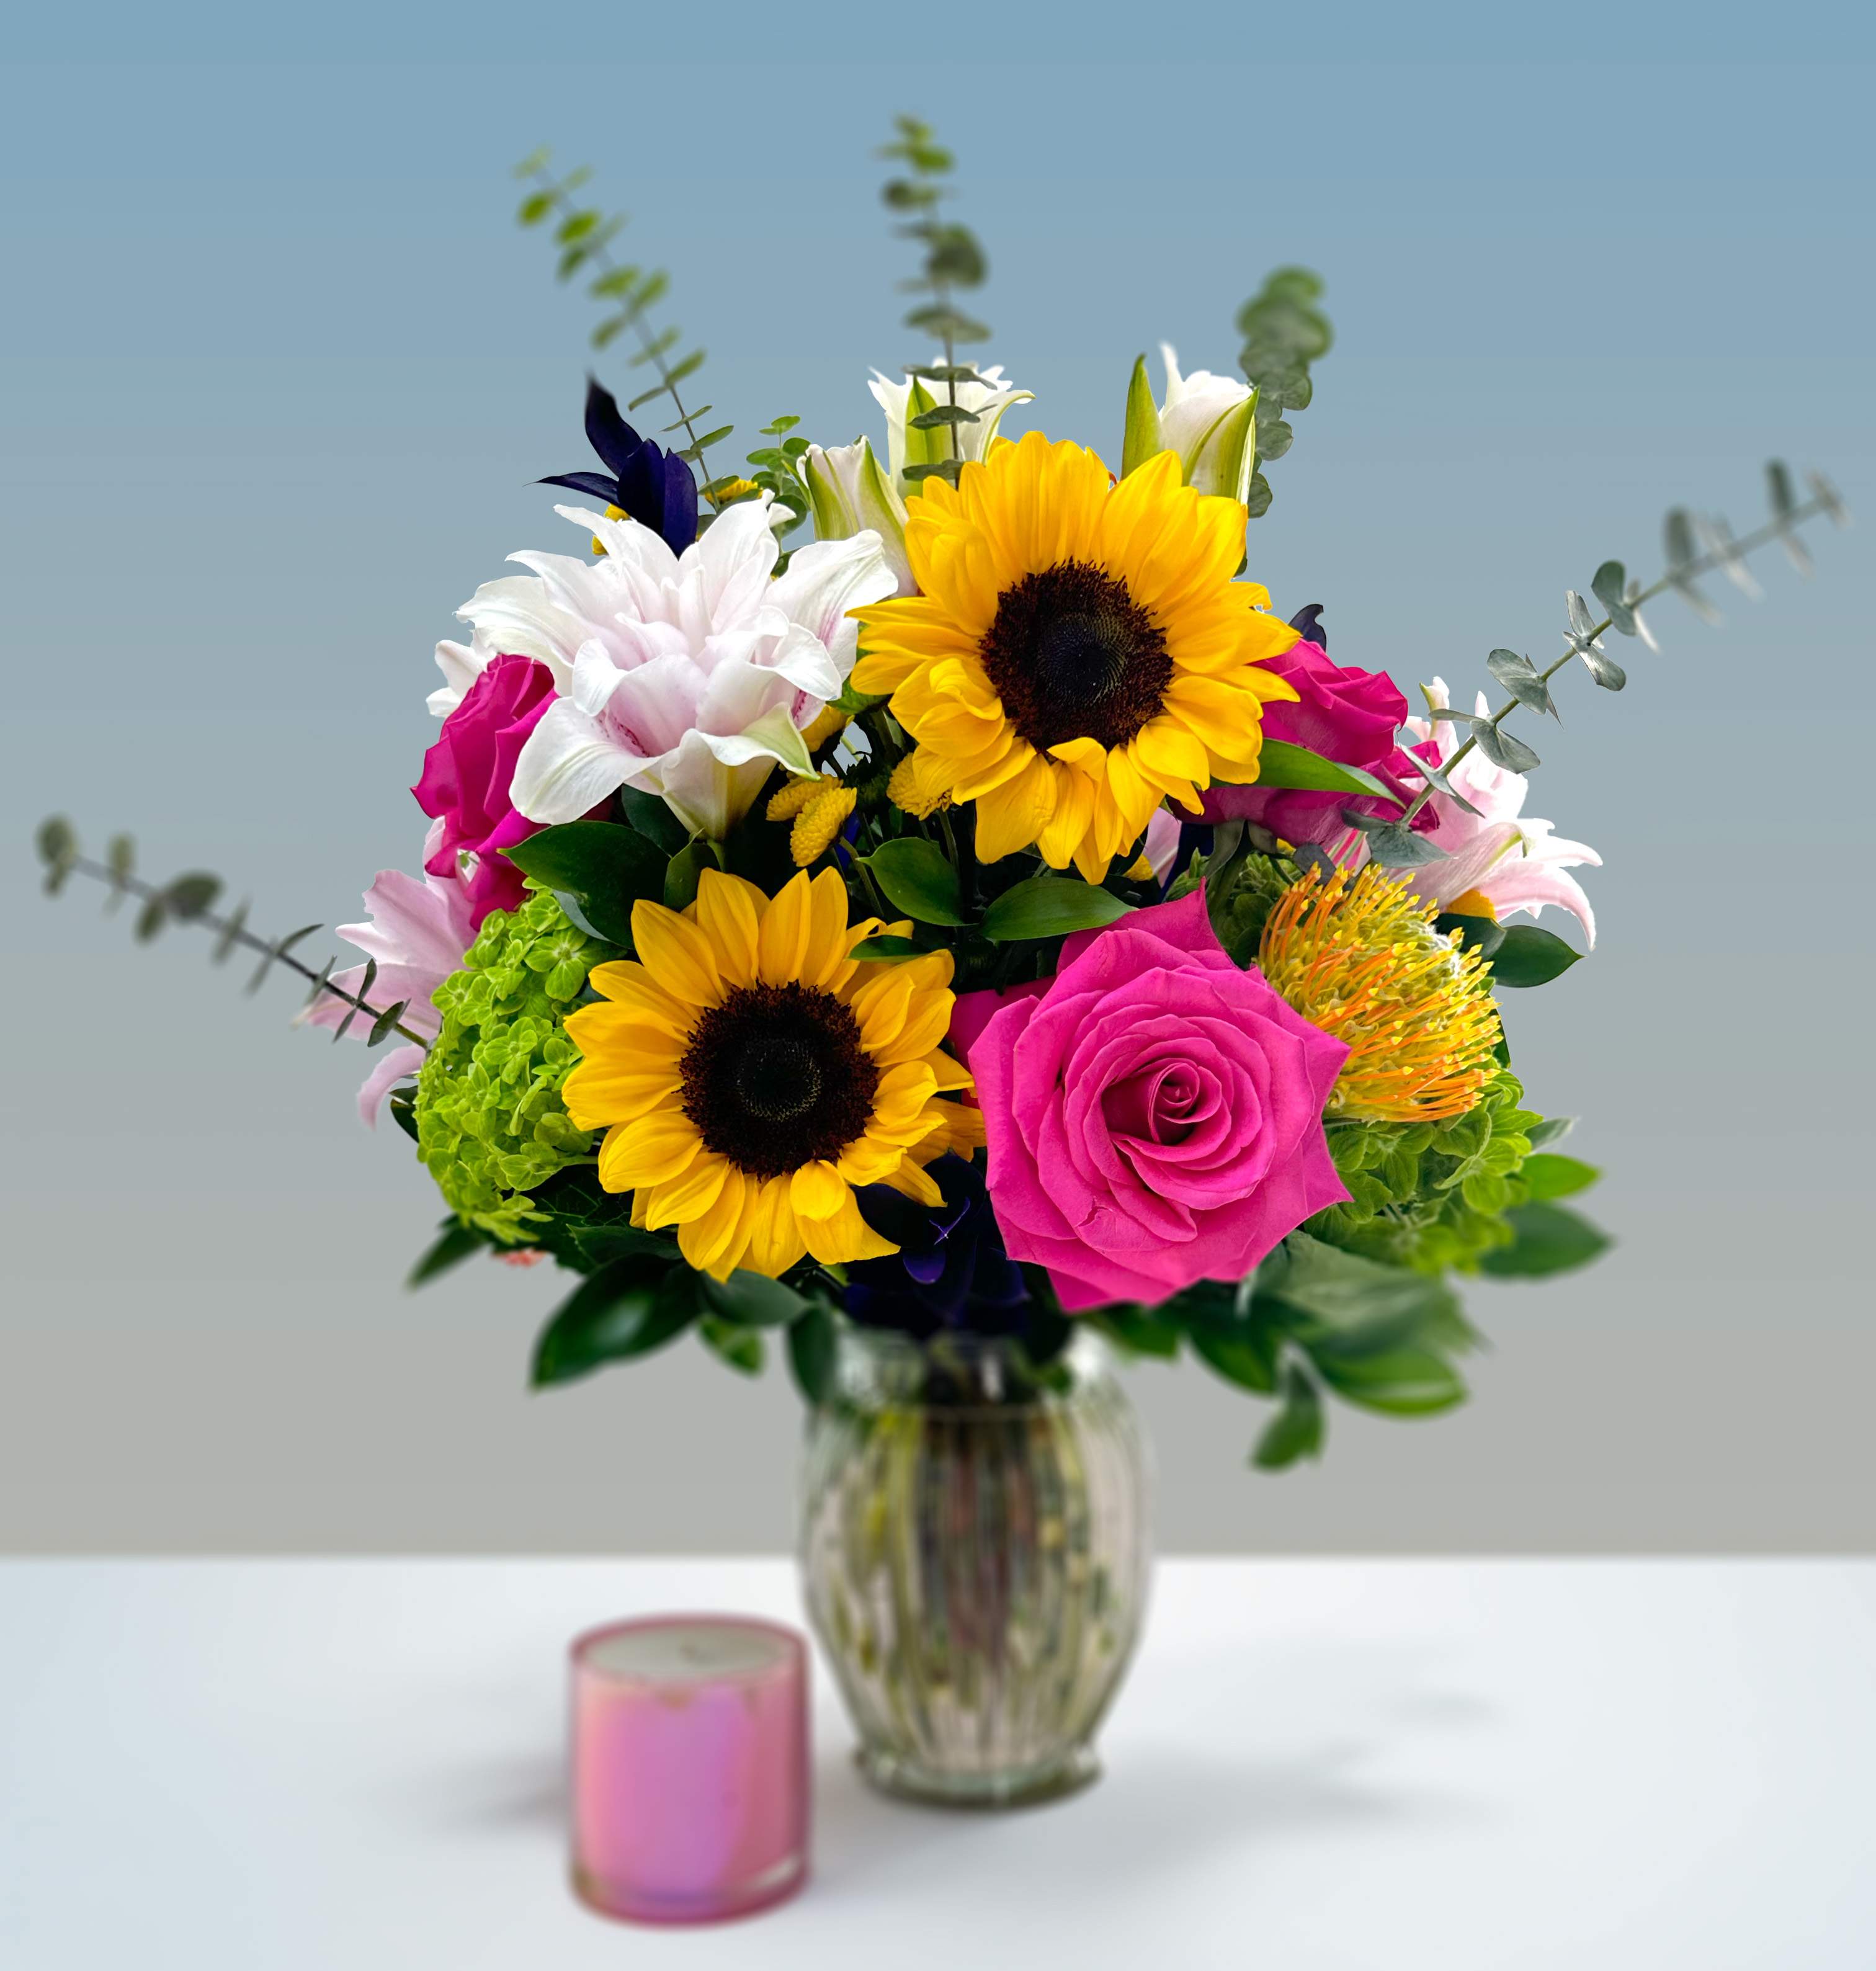 Isabella - Composed of hydrangeas, pink floyd roses, sunflowers, pink lilies, pincusion protea, buttons, and other seasonal blooms.